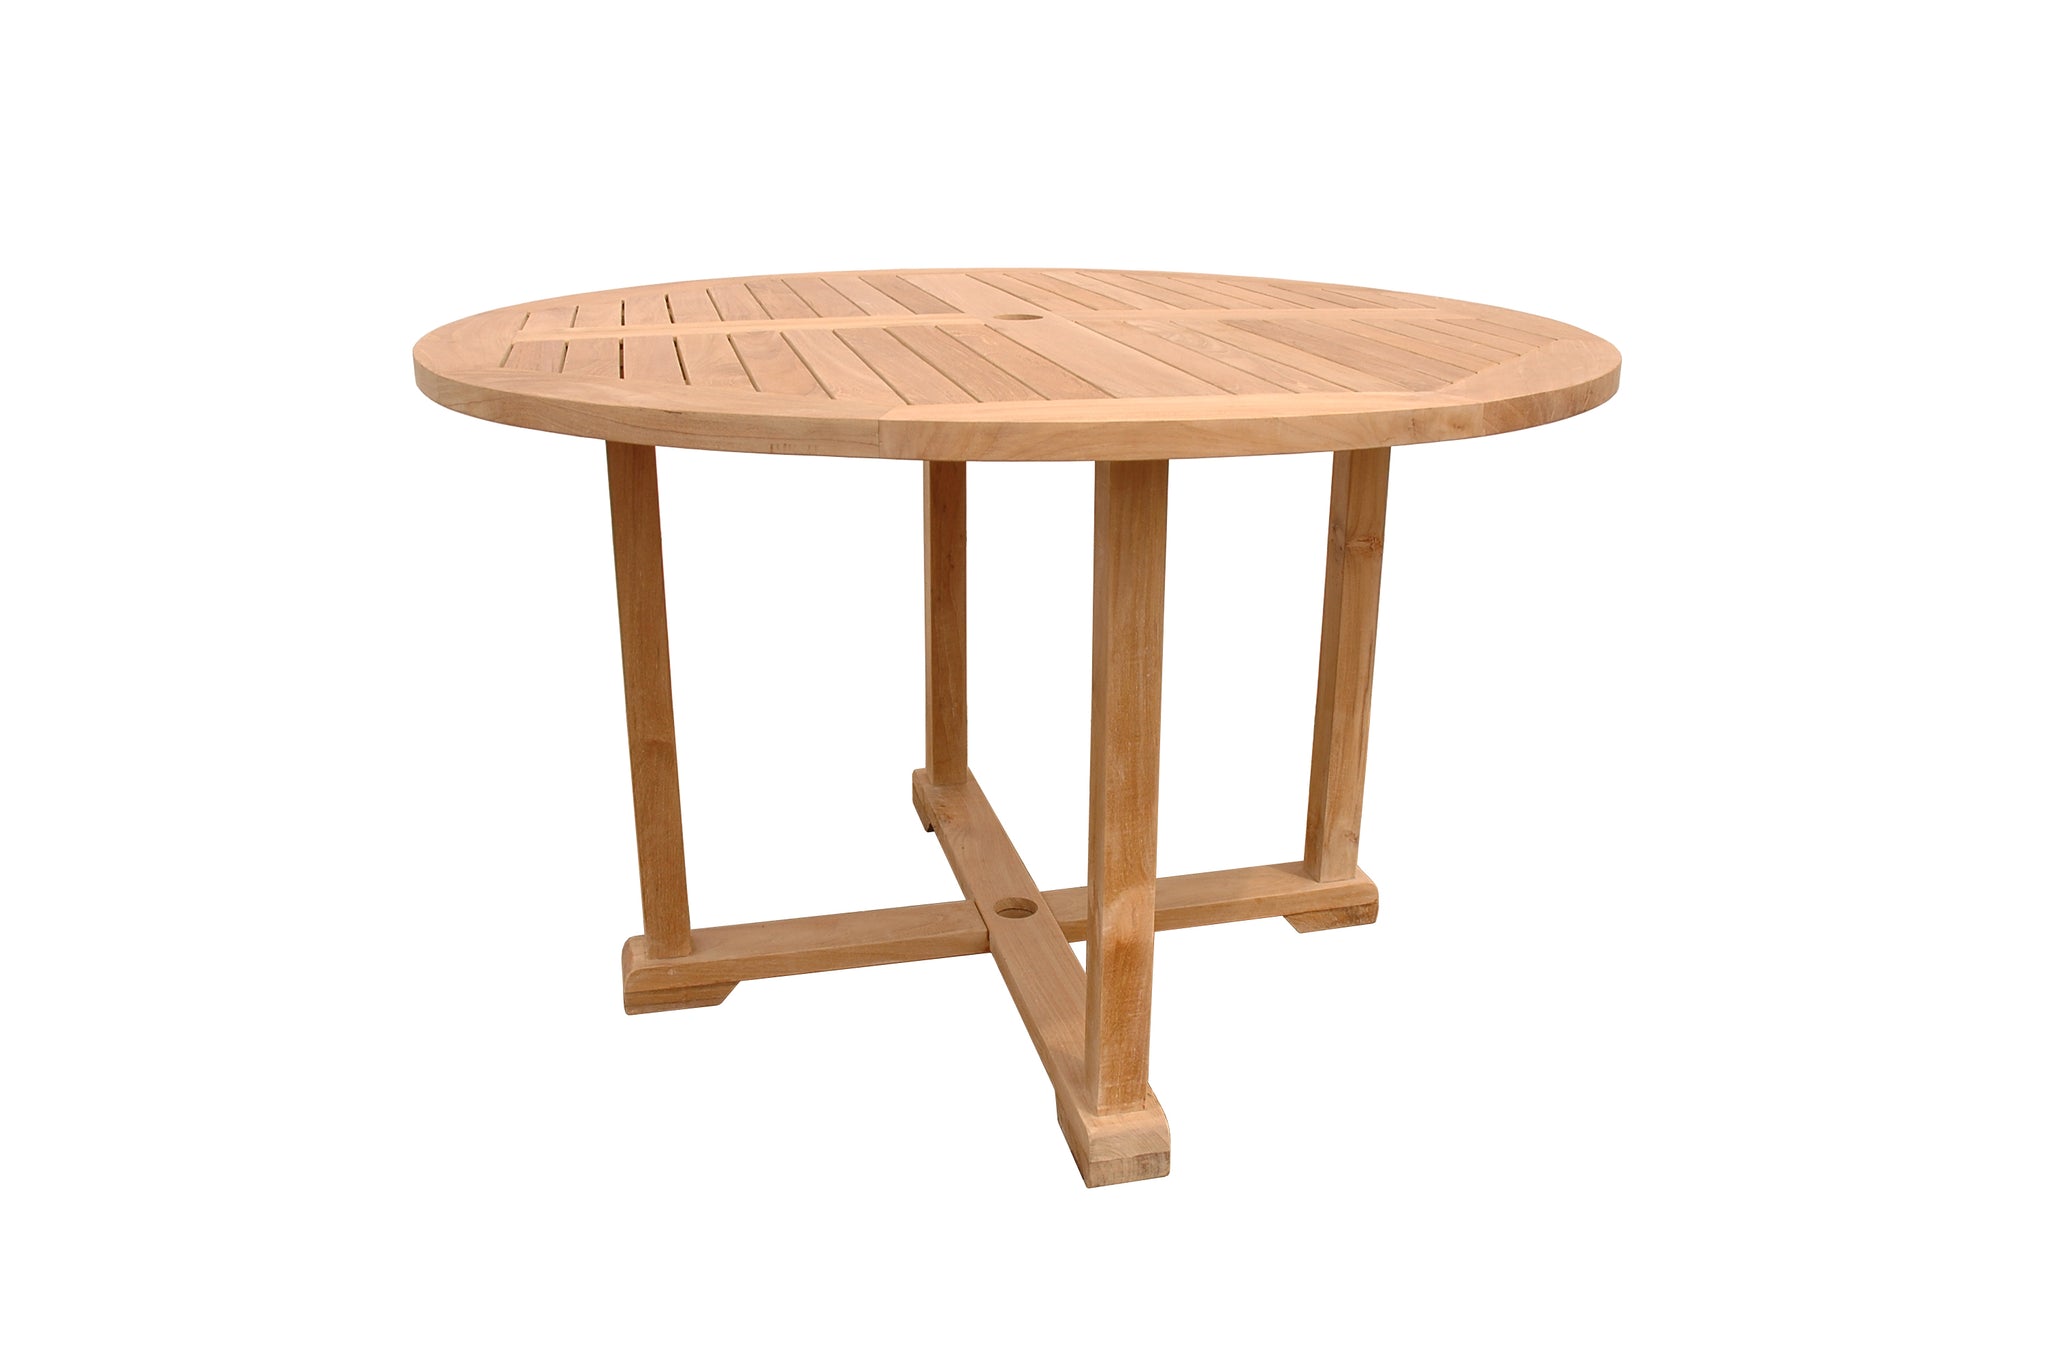 Anderson Teak Tosca 4-Foot Round Table w/ Frame TB-004RF